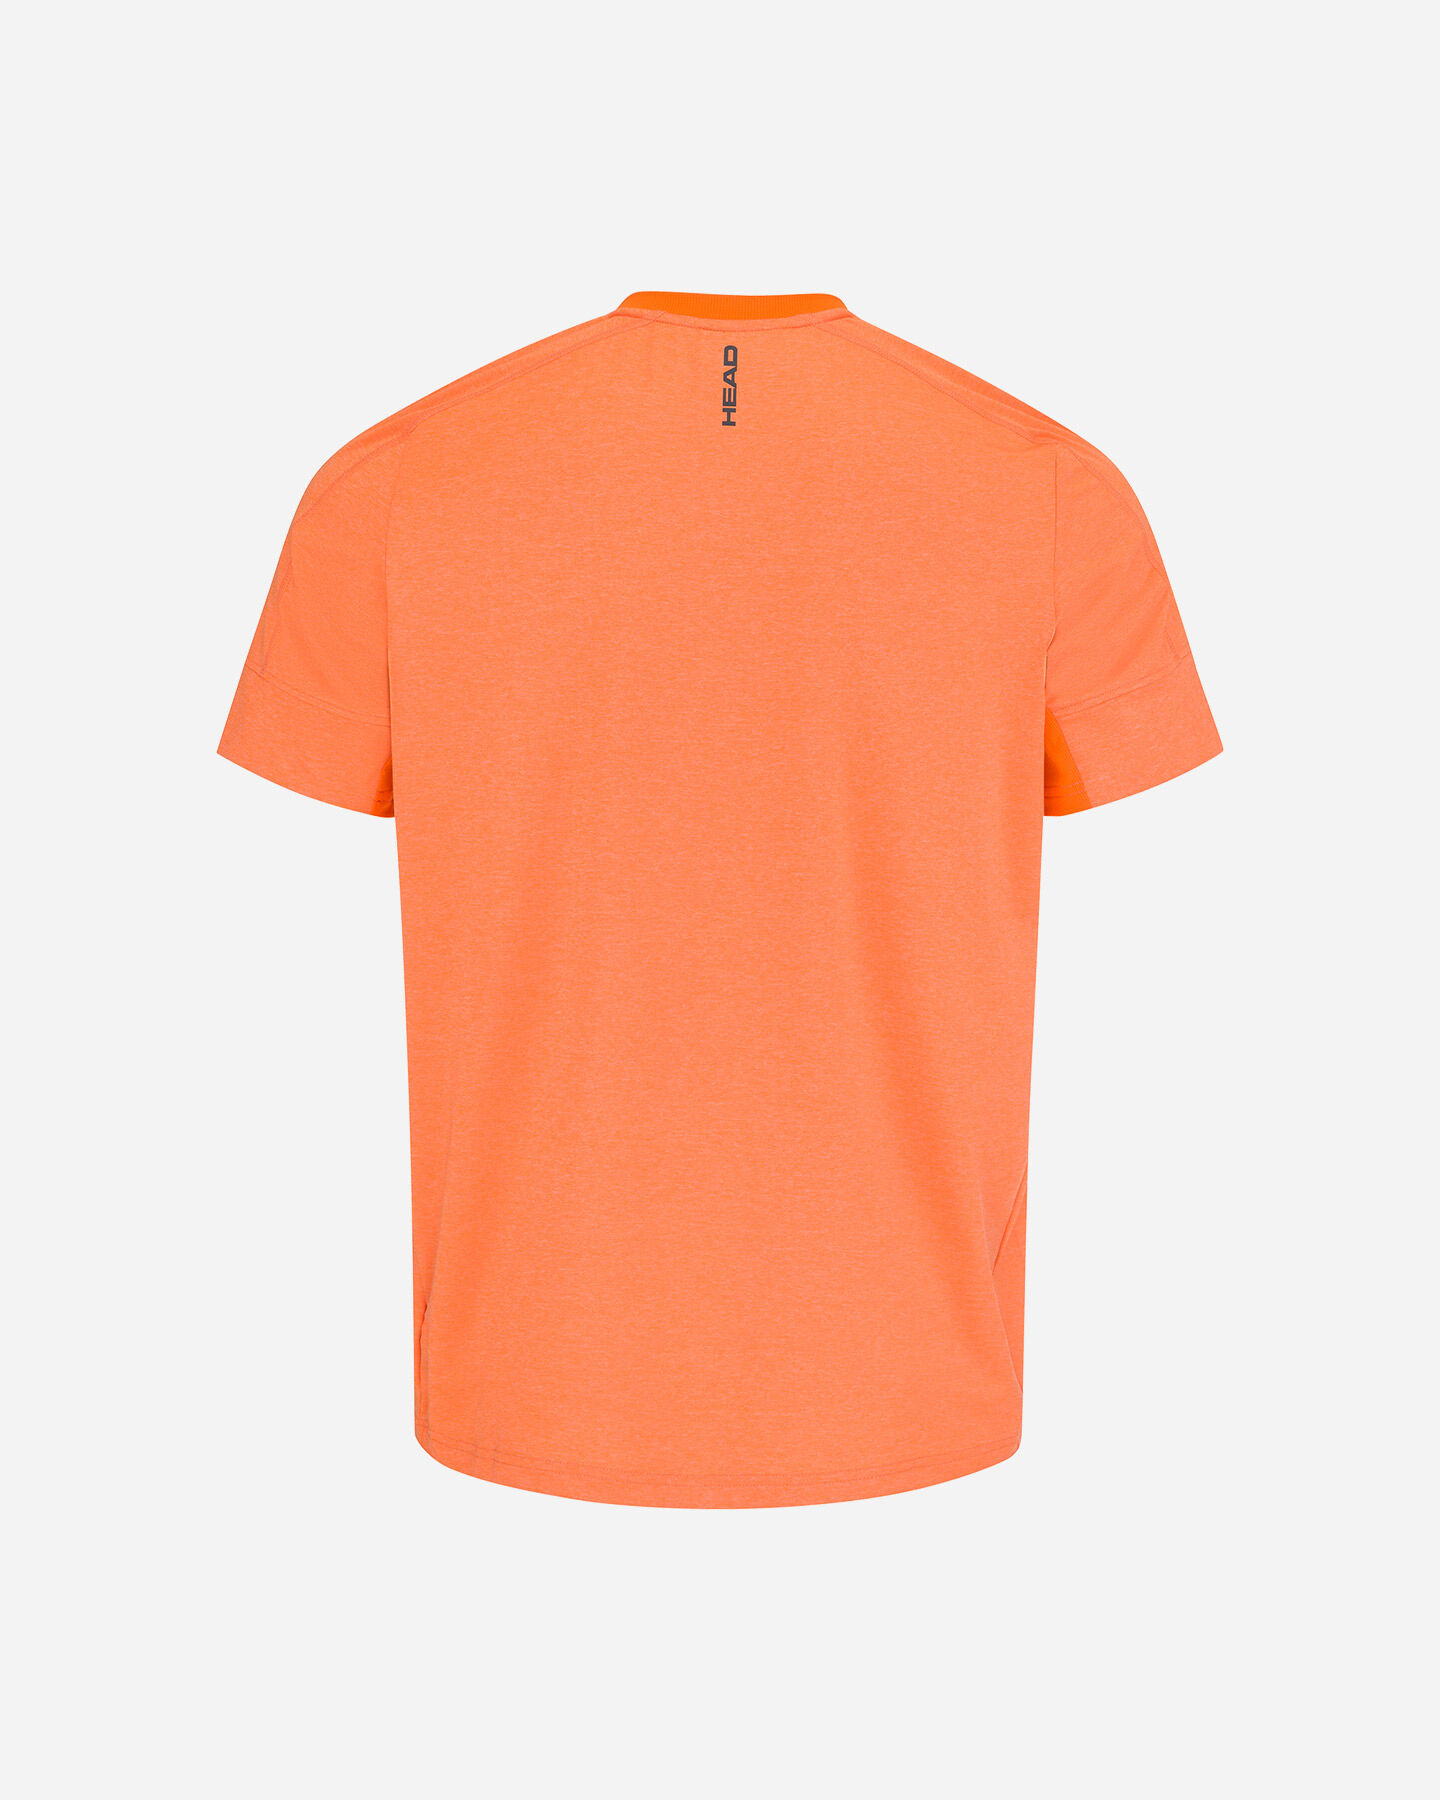  T-Shirt tennis HEAD PADEL M S5607101|OR|M scatto 1